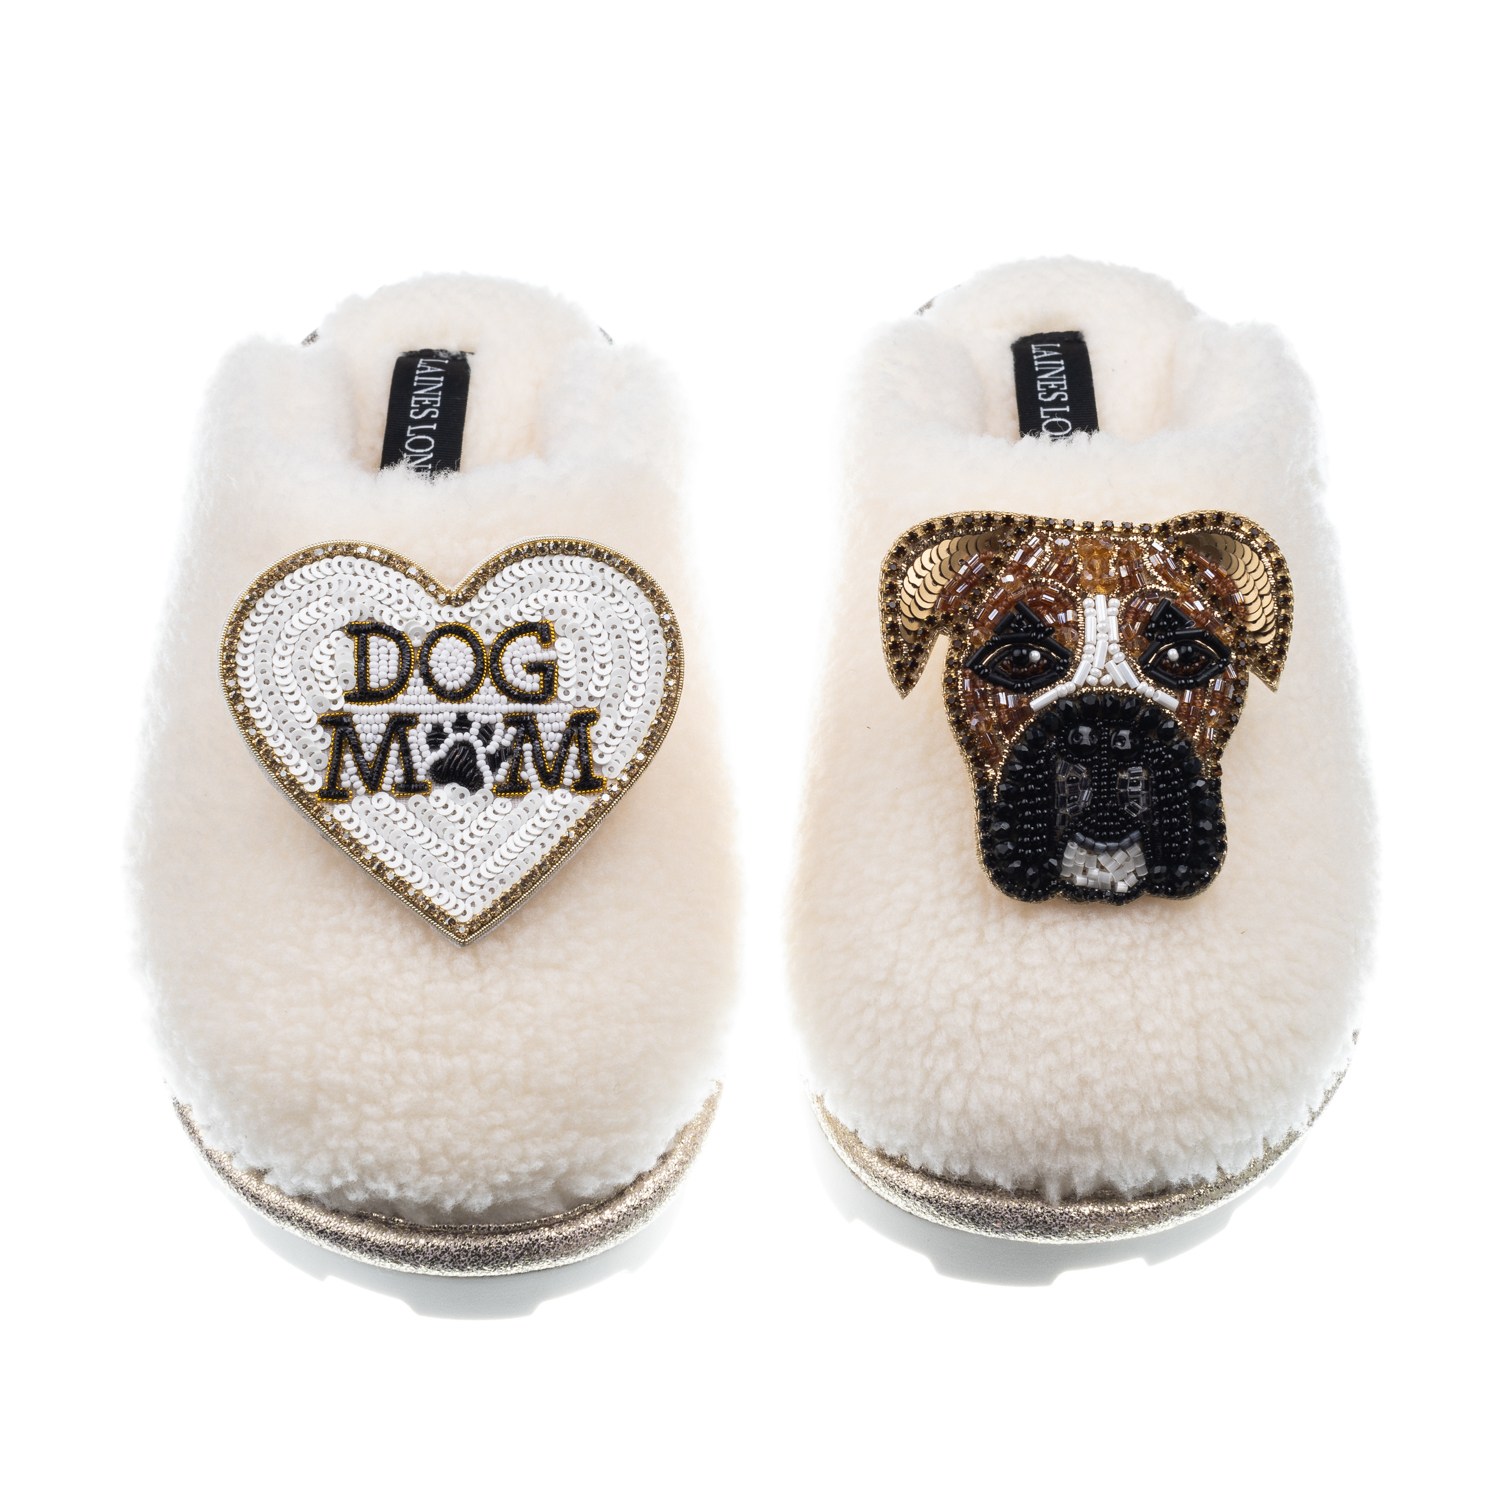 Laines London Women's White Teddy Closed Toe Slippers With Pip The Boxer & Dog Mum / Mom Brooches - Cream